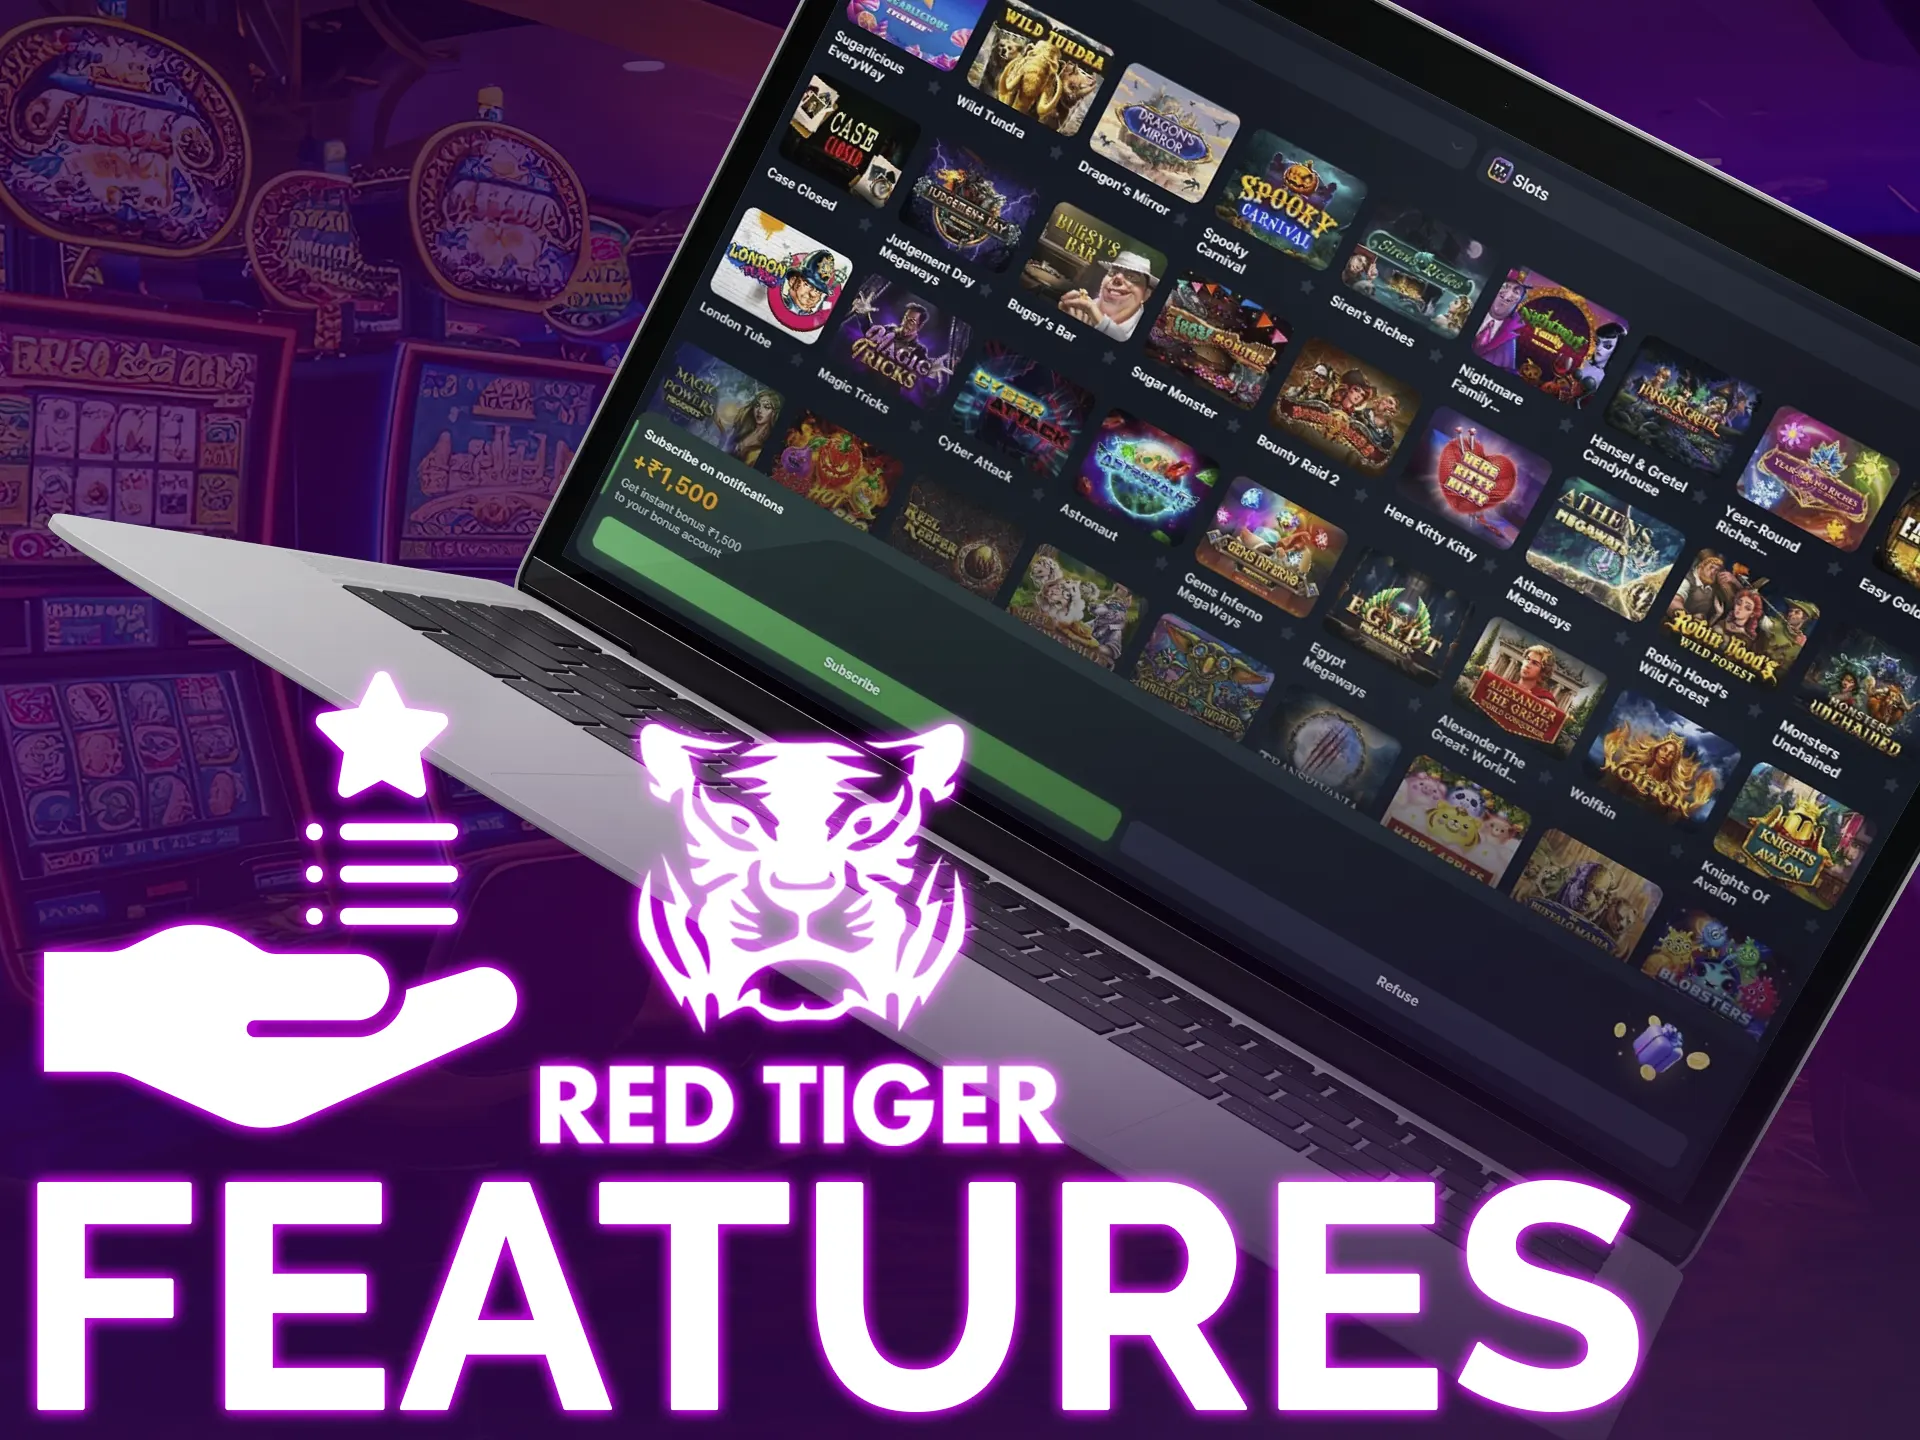 Red Tiger's innovative mechanics, including daily jackpots, smart spins, and engaging tournaments, enhance gameplay.